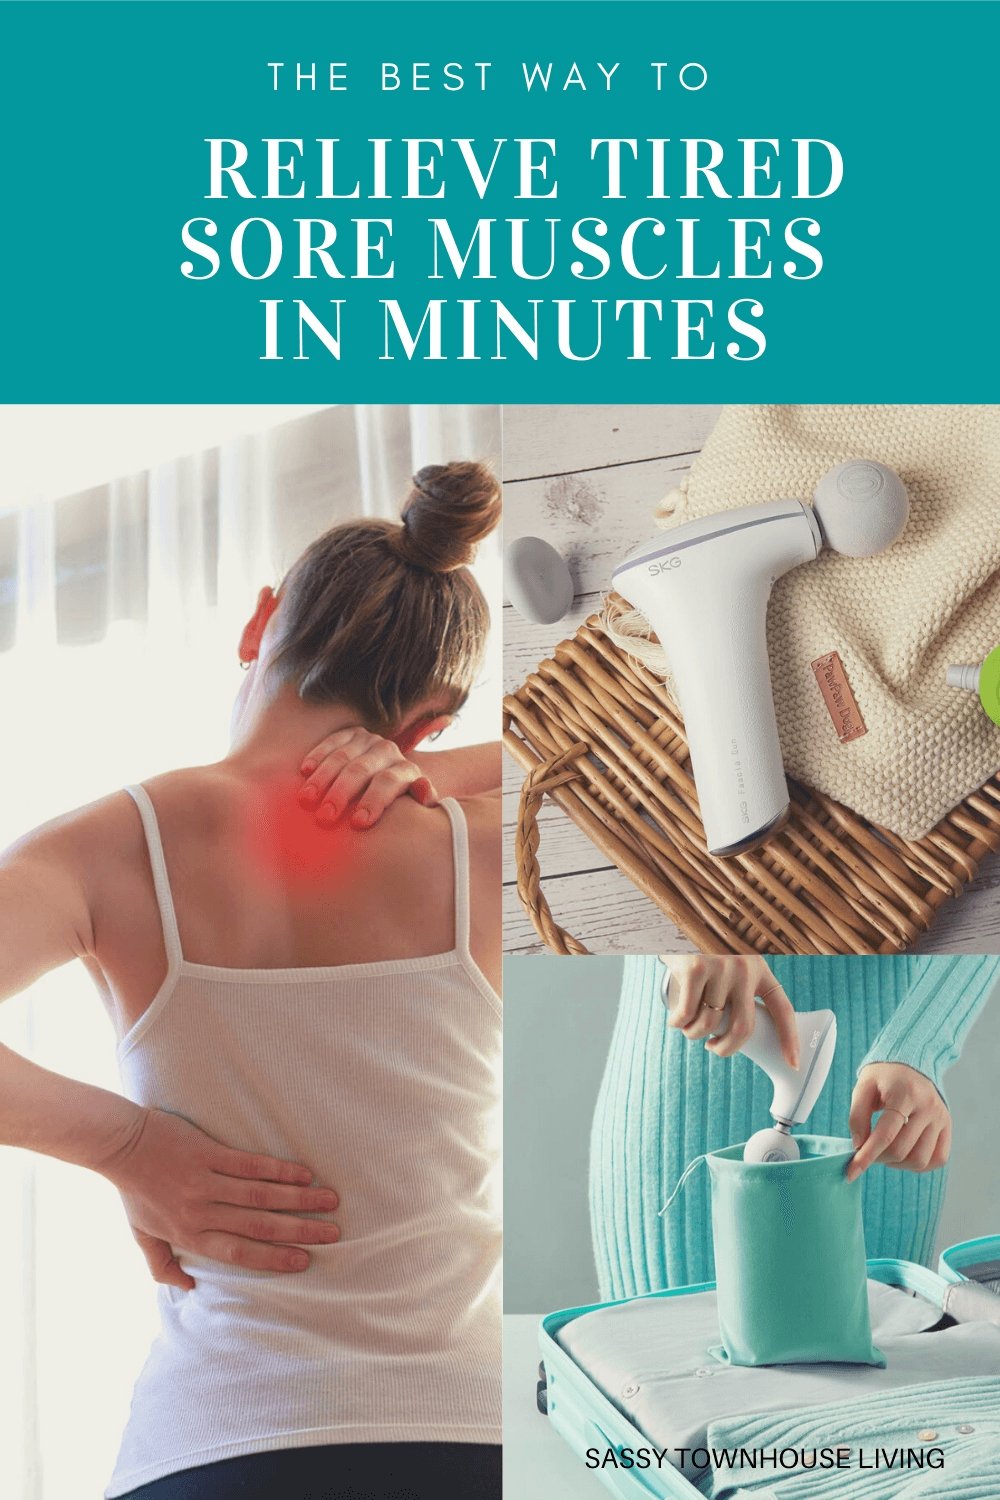 The Best Way To Relieve Tired Sore Muscles In Minutes - SKG